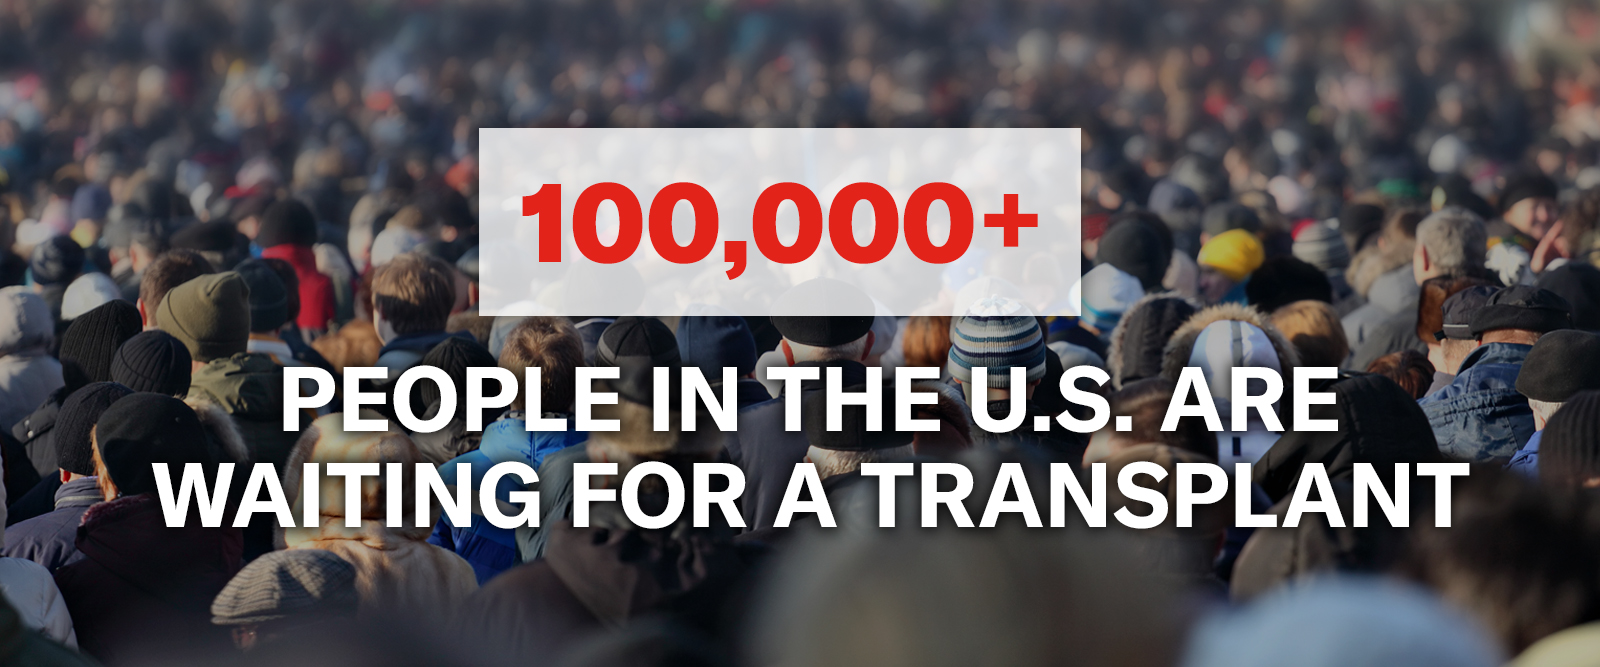 100,000+ people in the U.S. are waiting for a transplant.